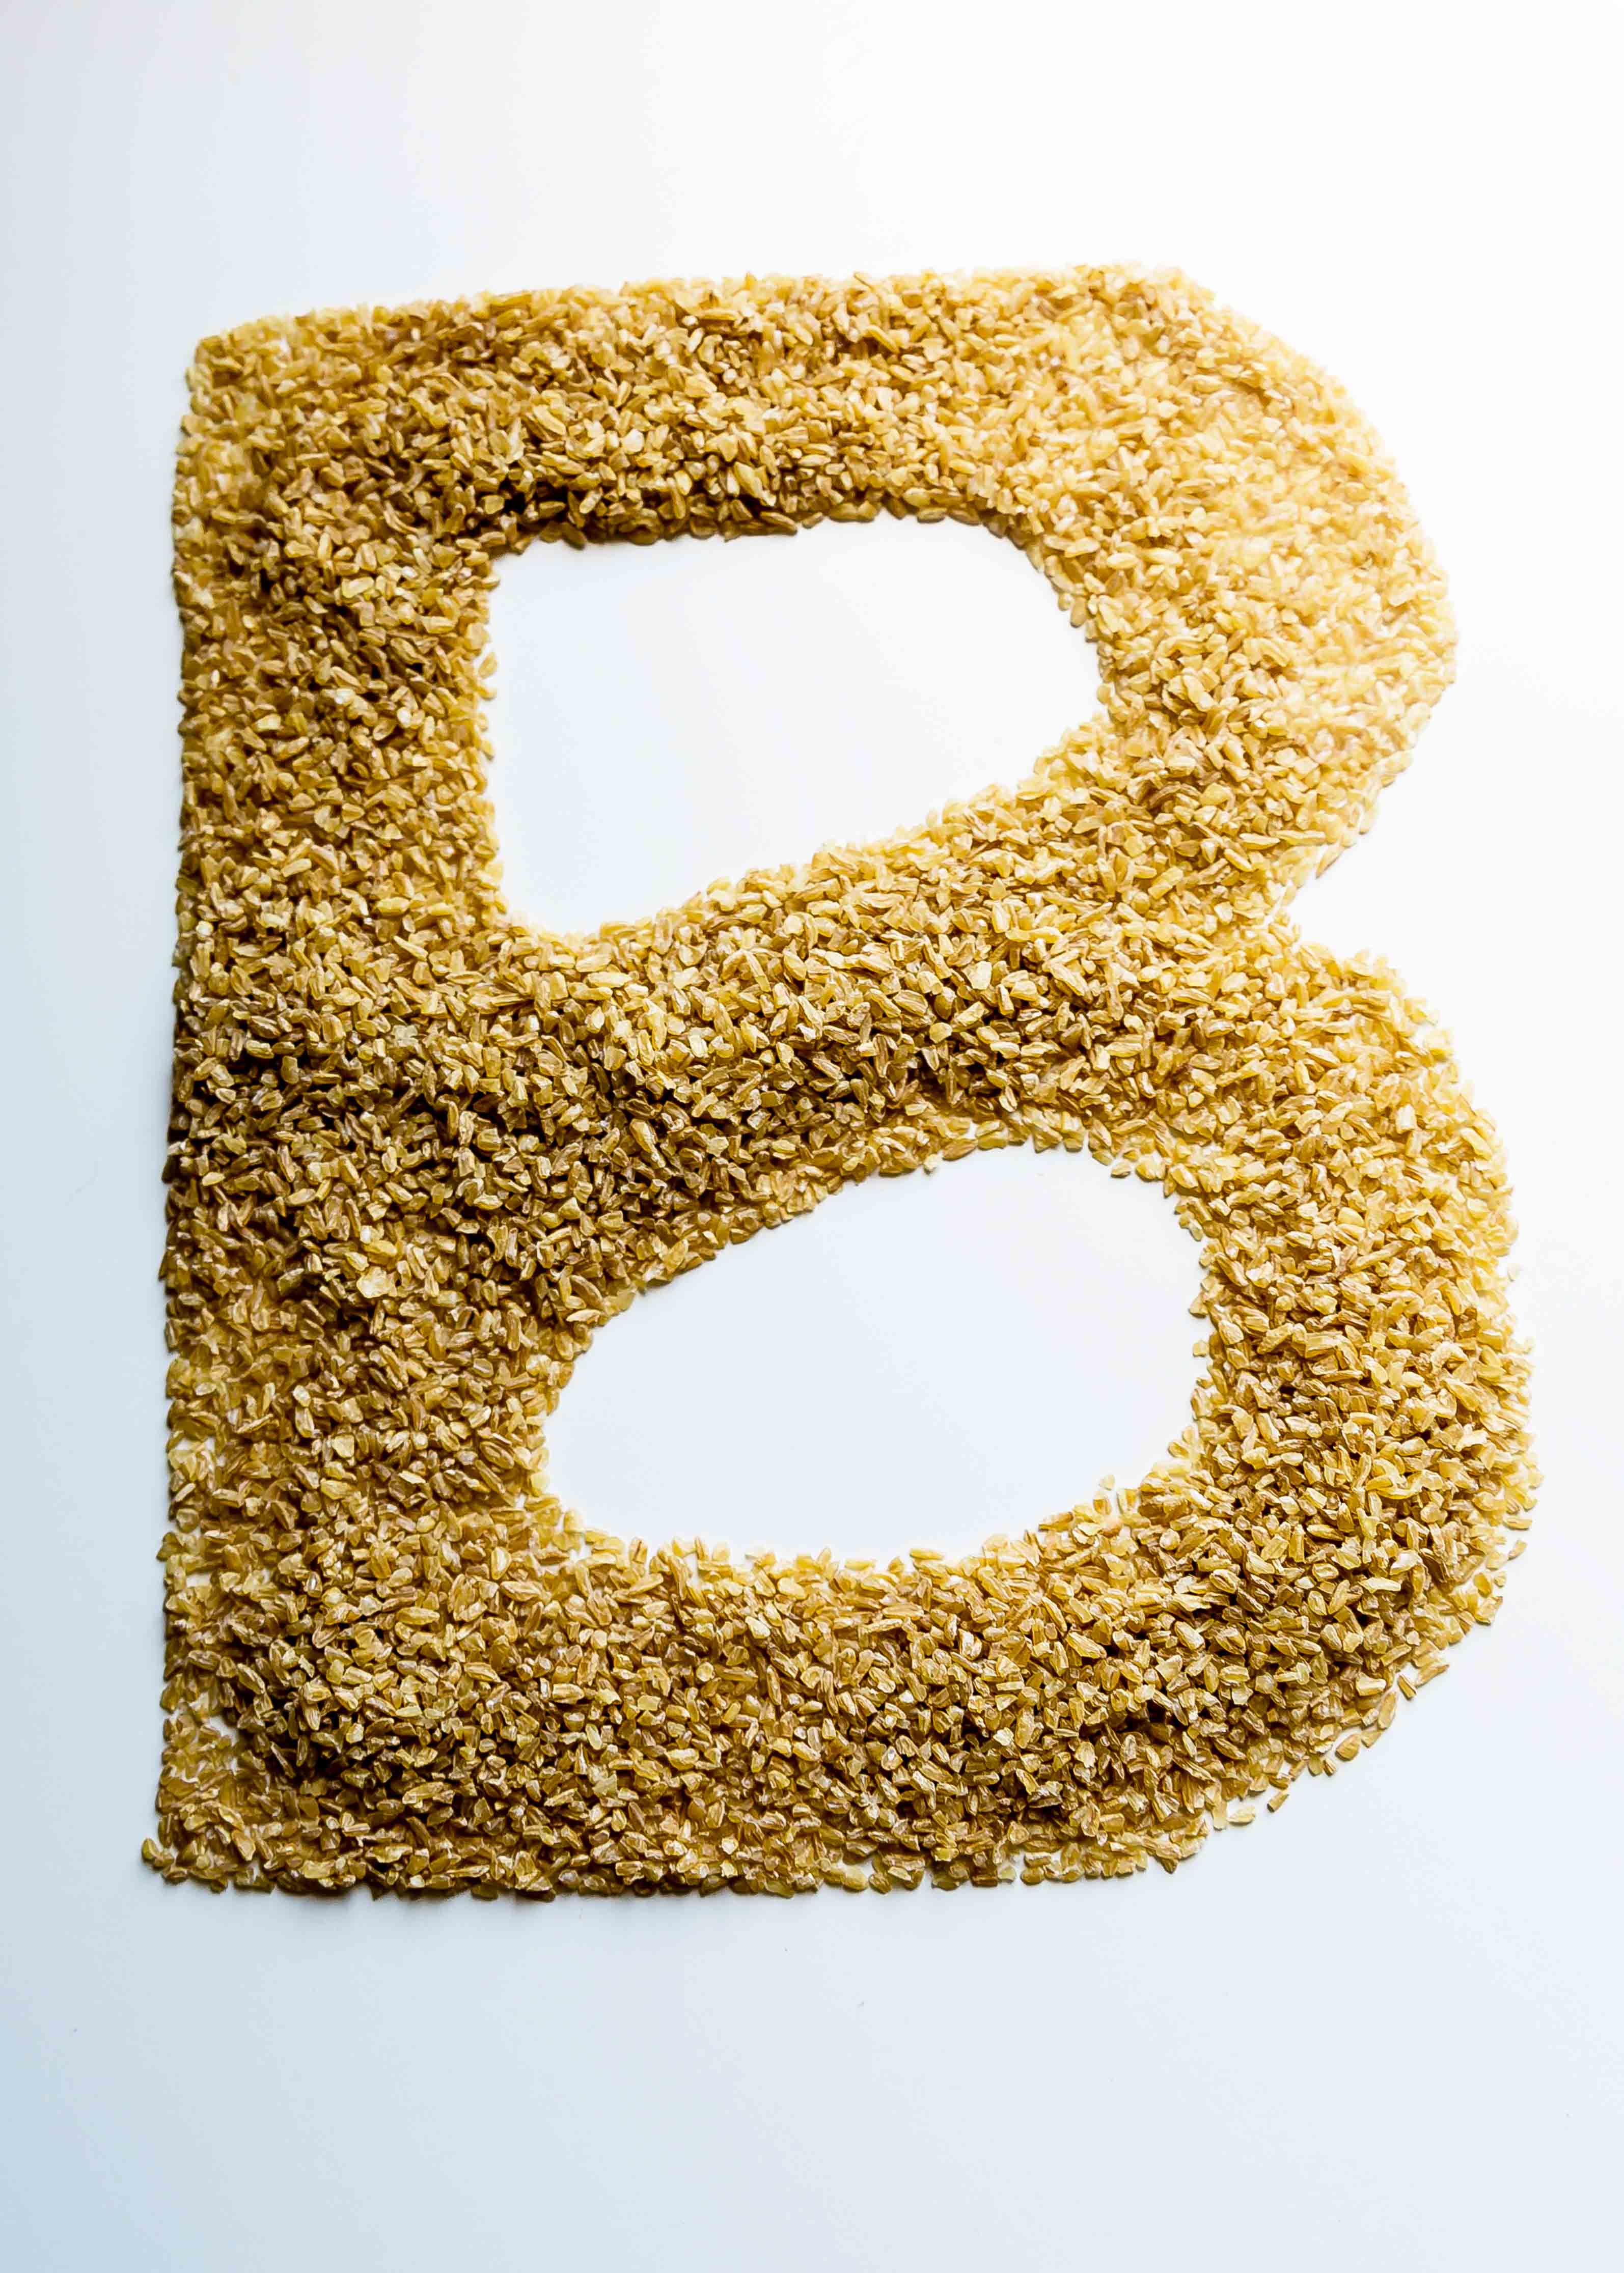 Weeknight whole grains need to be quick cooking and versatile. Bring on the bulgur! What is bulgur? Knowing how to cook bulgur is the best way to make fast food from your pantry and wait til you see all the ideas to make it meatless!